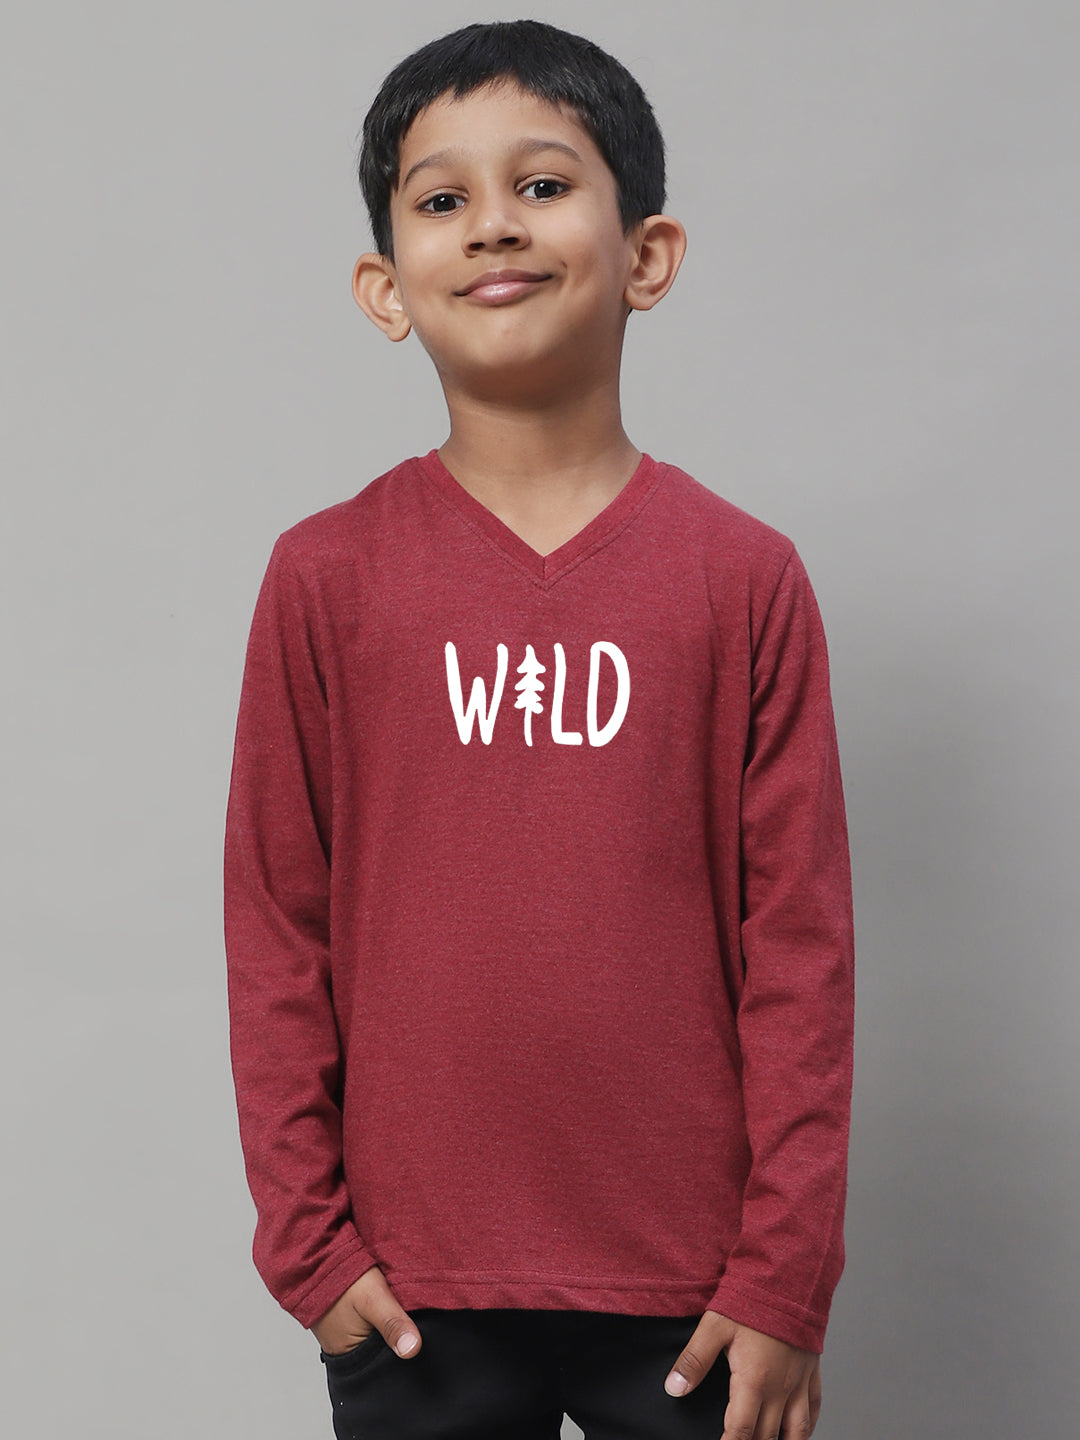 Boys Wild Casual Fit Printed T-Shirt - Friskers